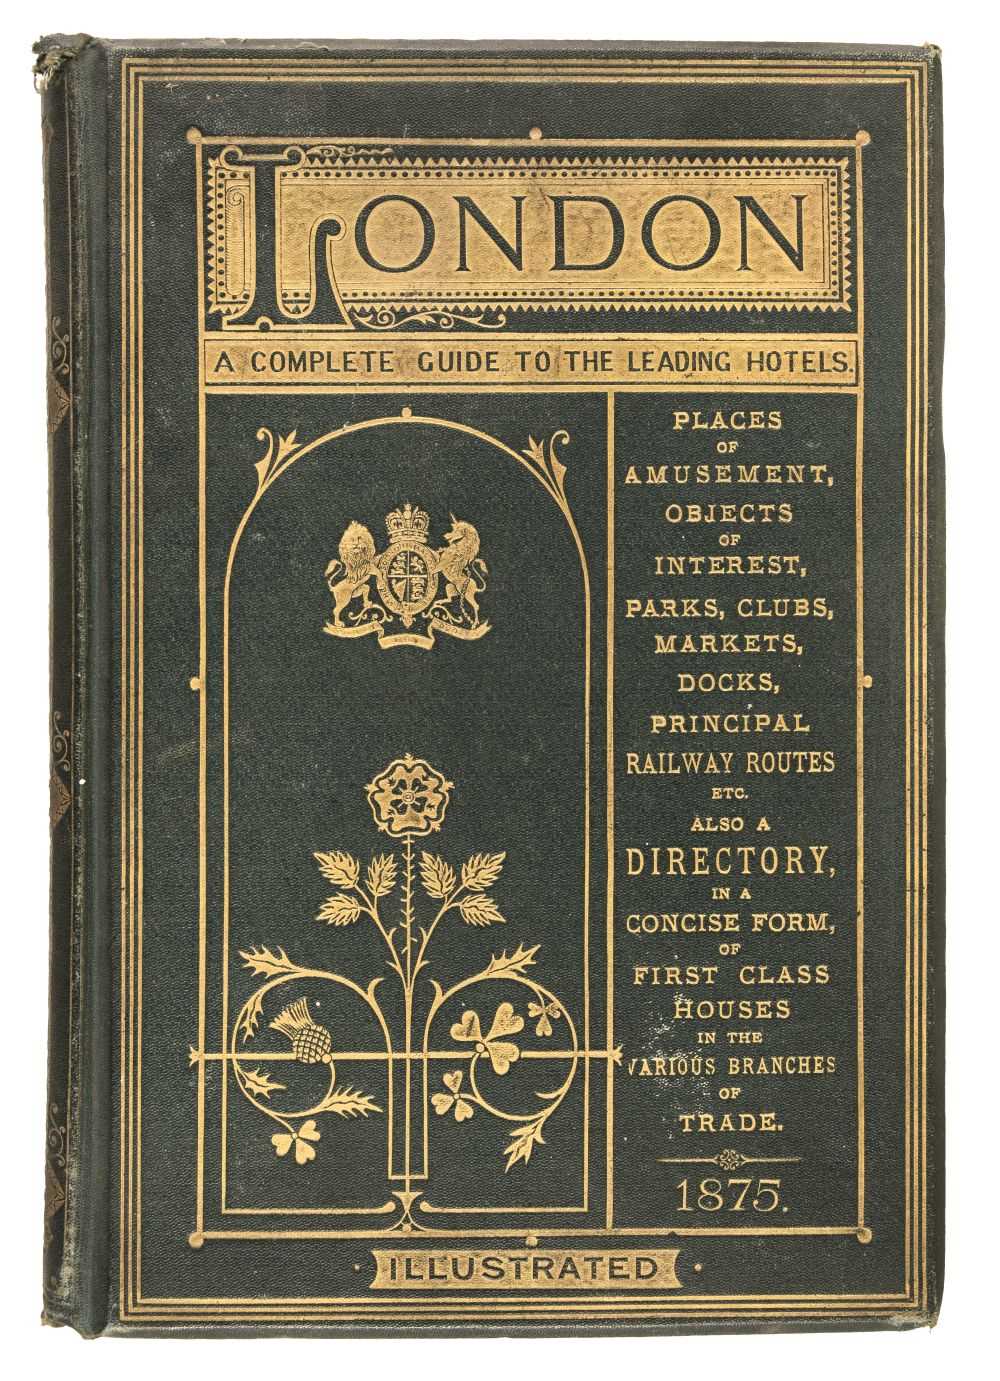 Lot 26 - Herbert (Henry, publisher). London (Illustrated). A Complete Guide, 1875